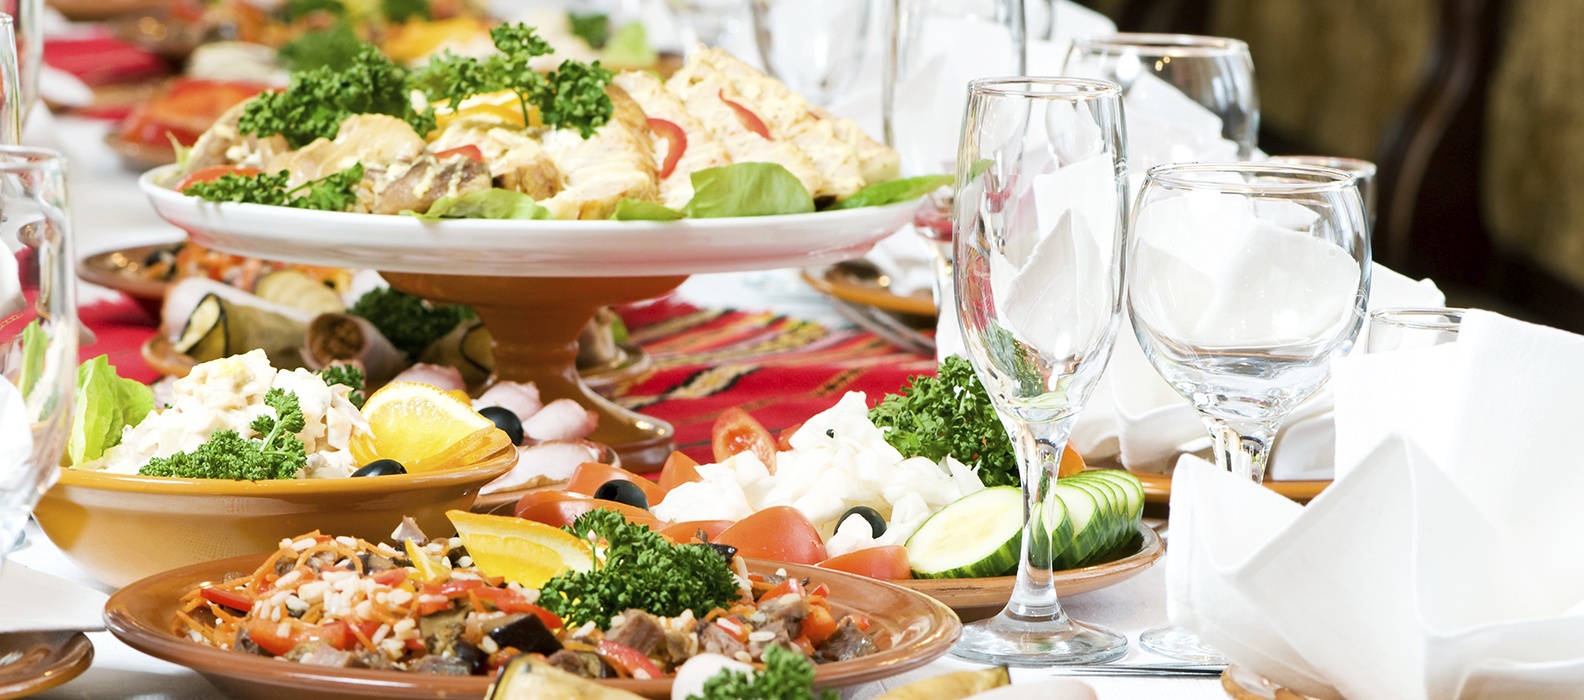 Finding a Reliable Wedding Catering Service - Things to Know